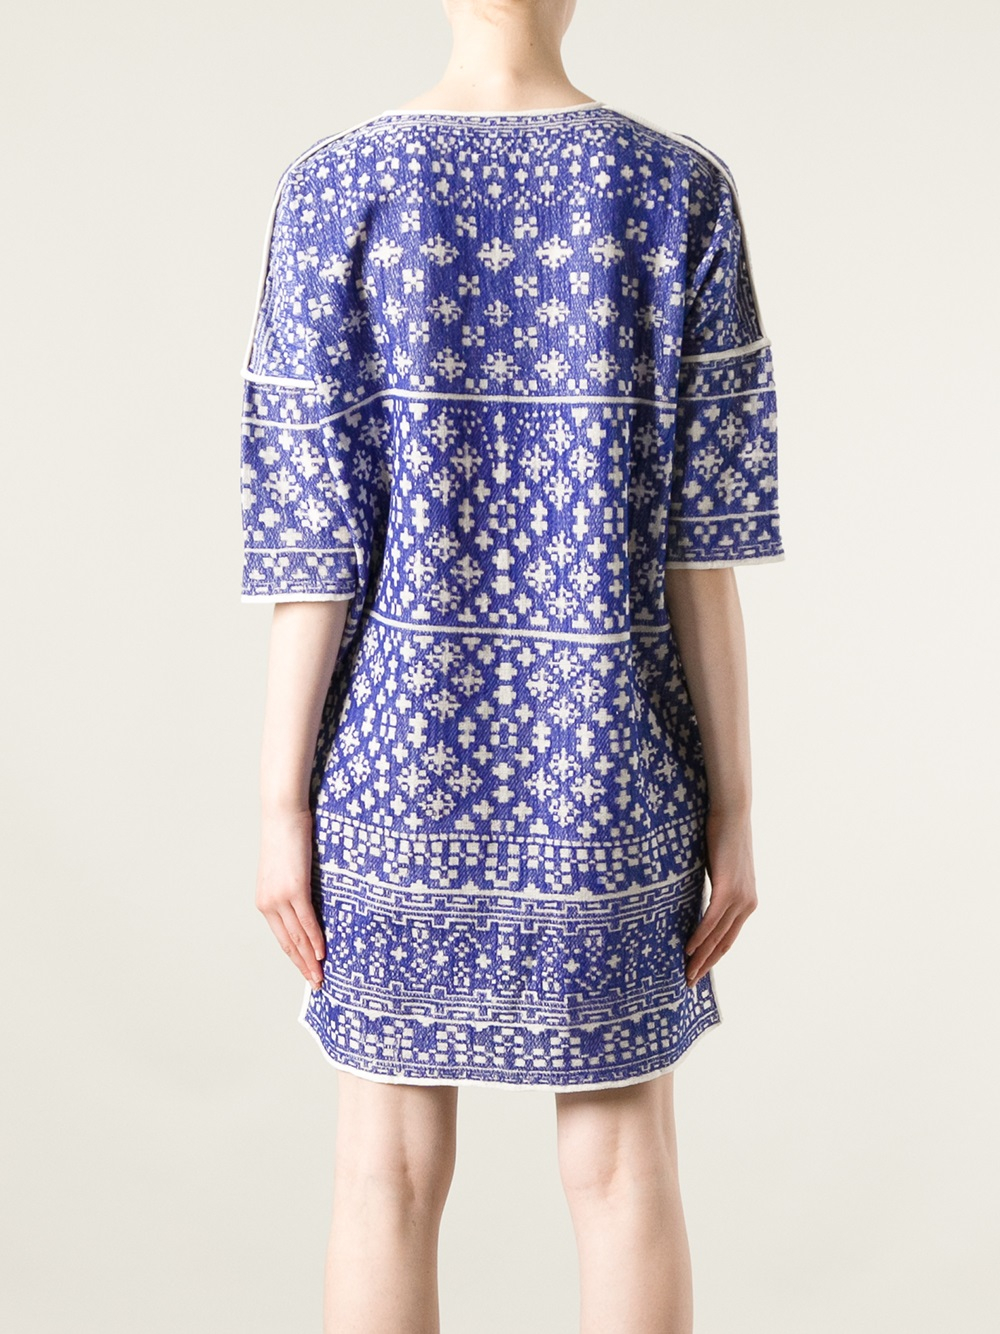 Lyst - Étoile Isabel Marant Beverly Embroidered Dress in Blue